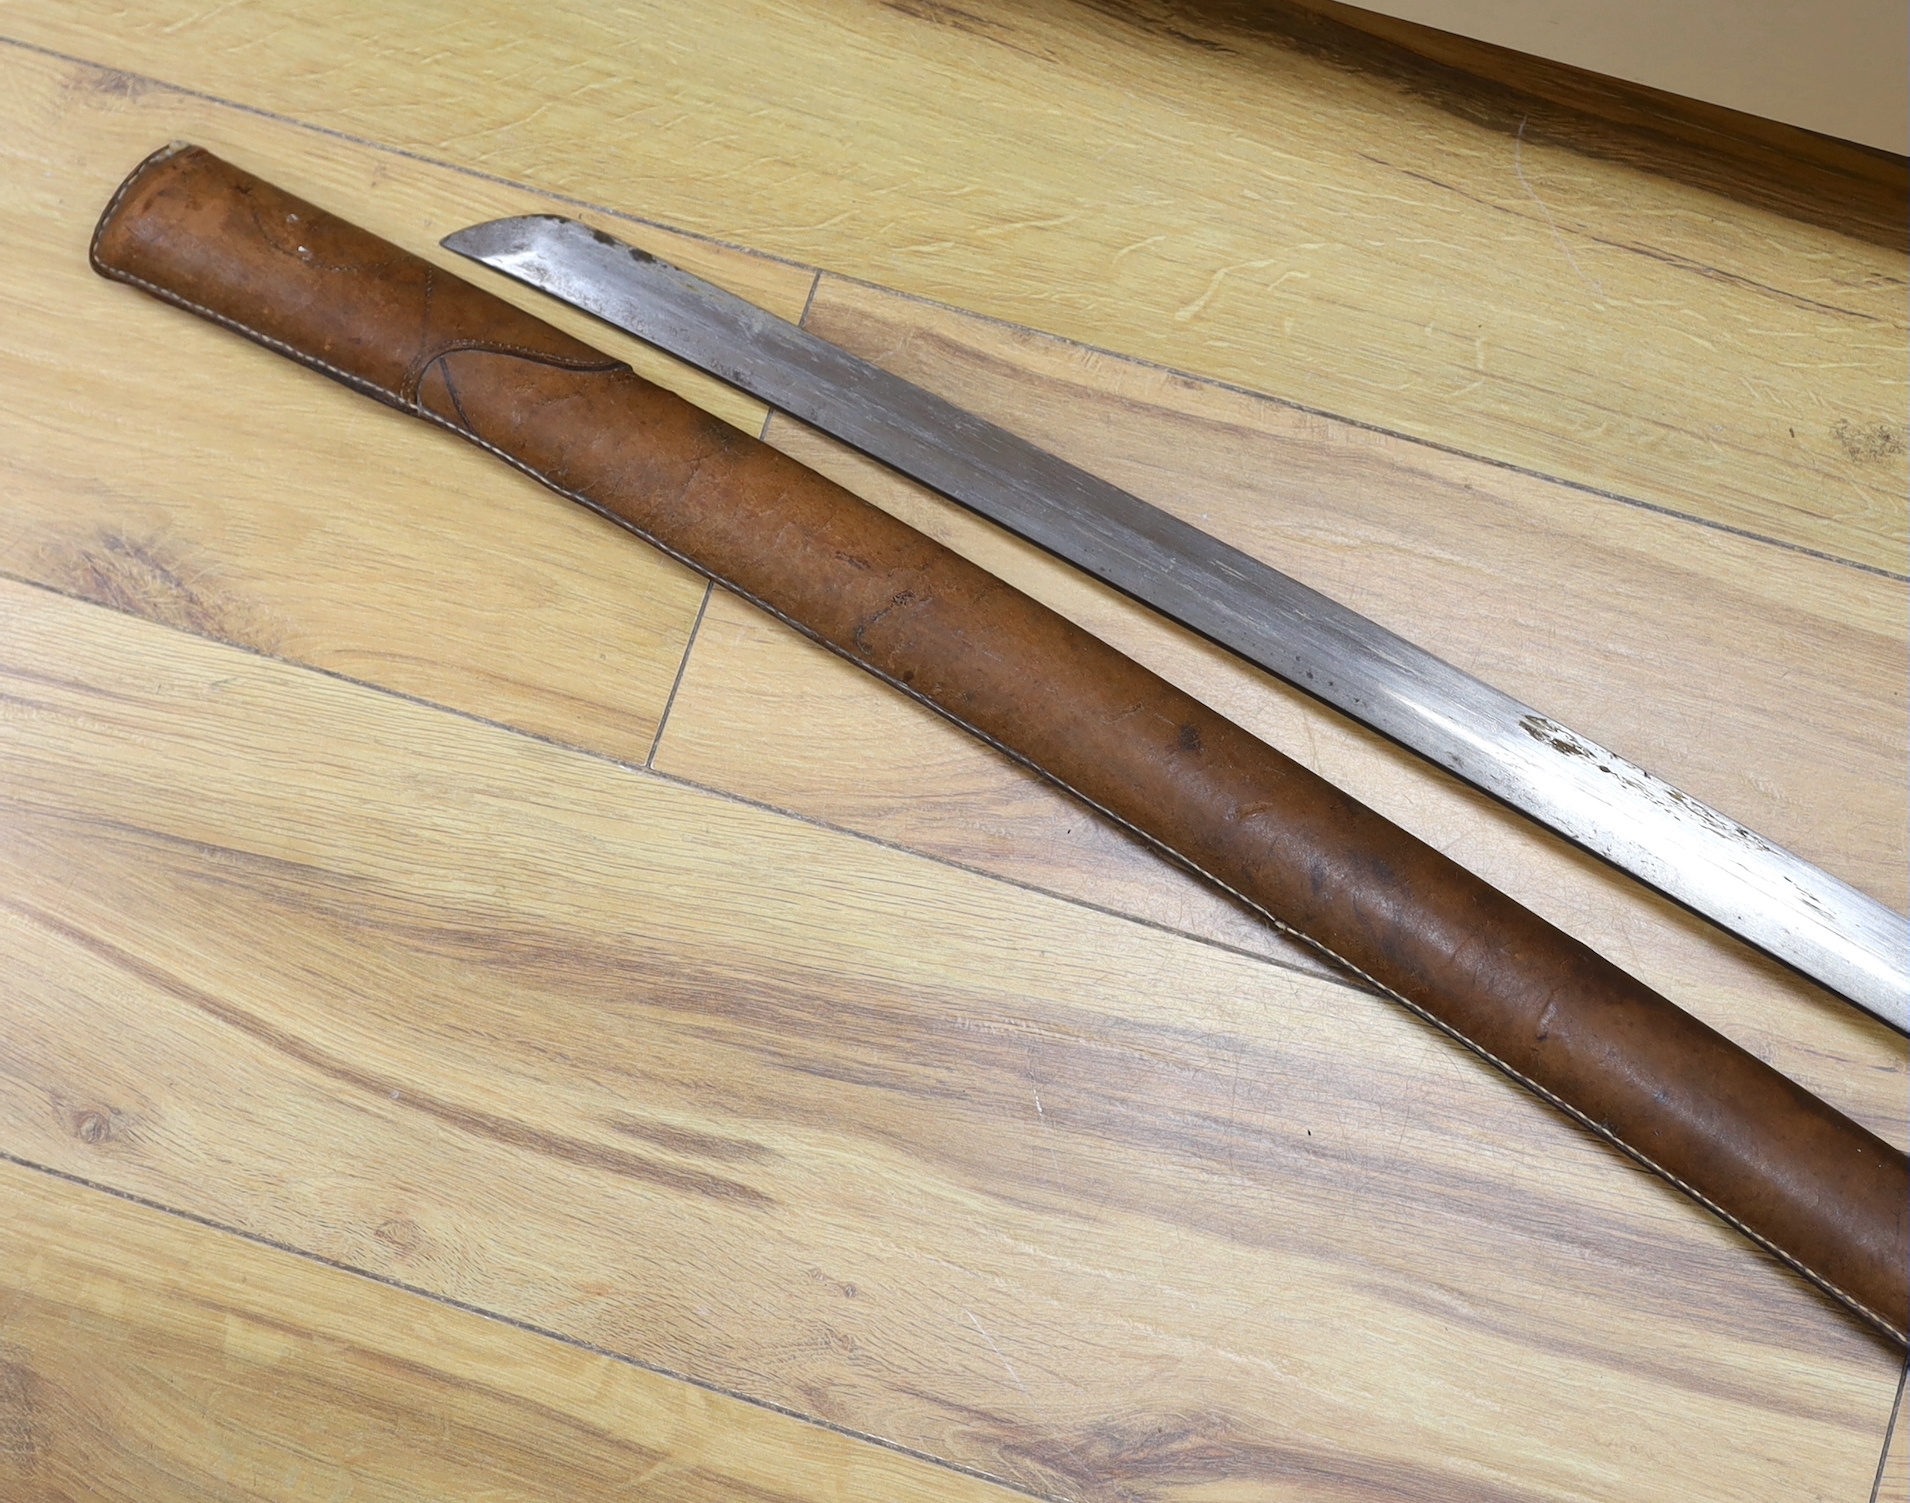 A Japanese WWII Shin gunto (sword) and leather mounted scabbard - Image 5 of 6